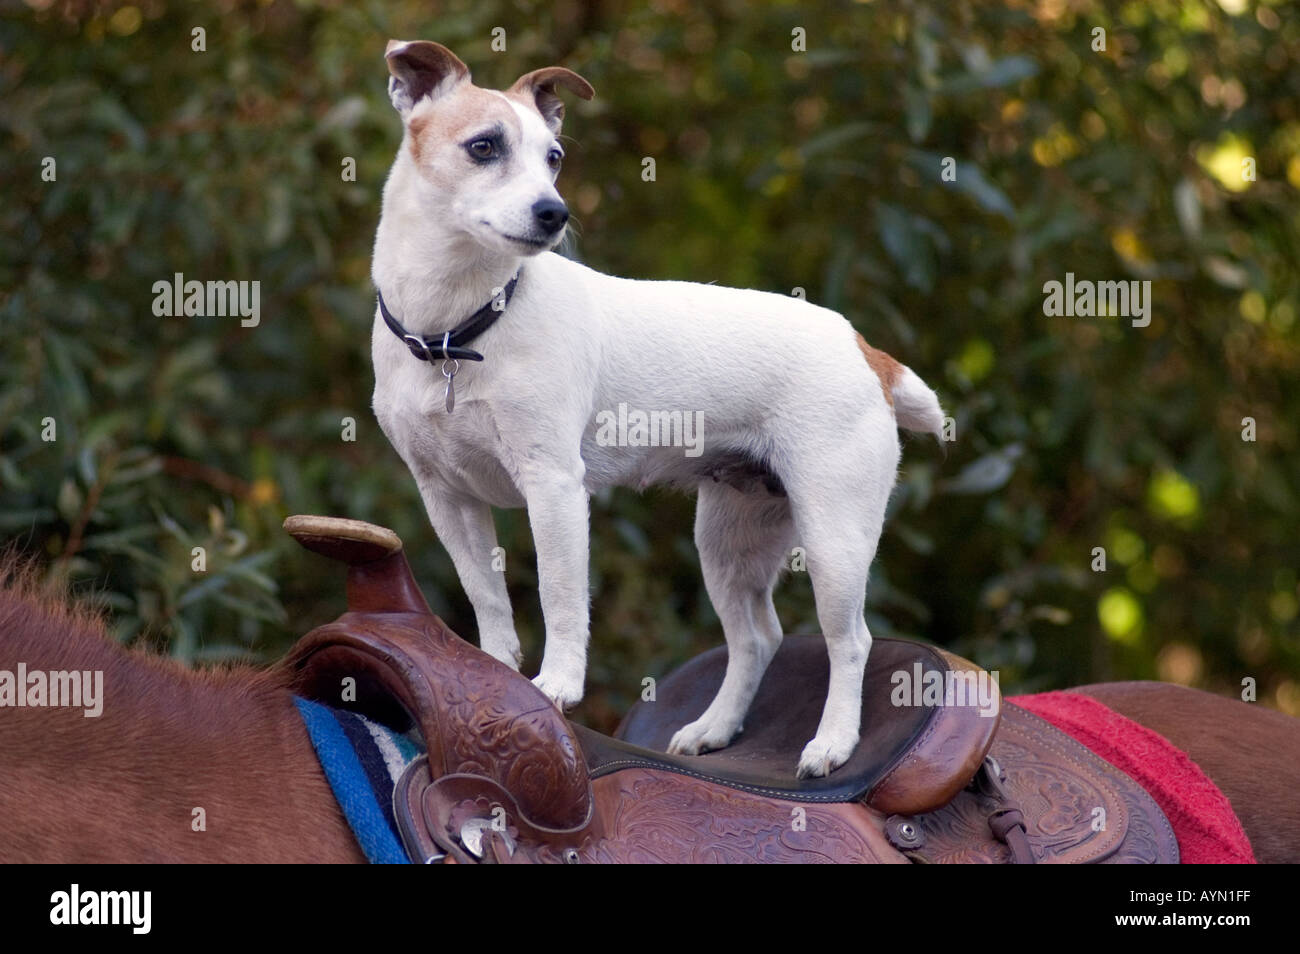 A Dog on the back of a horse  Stock Photo